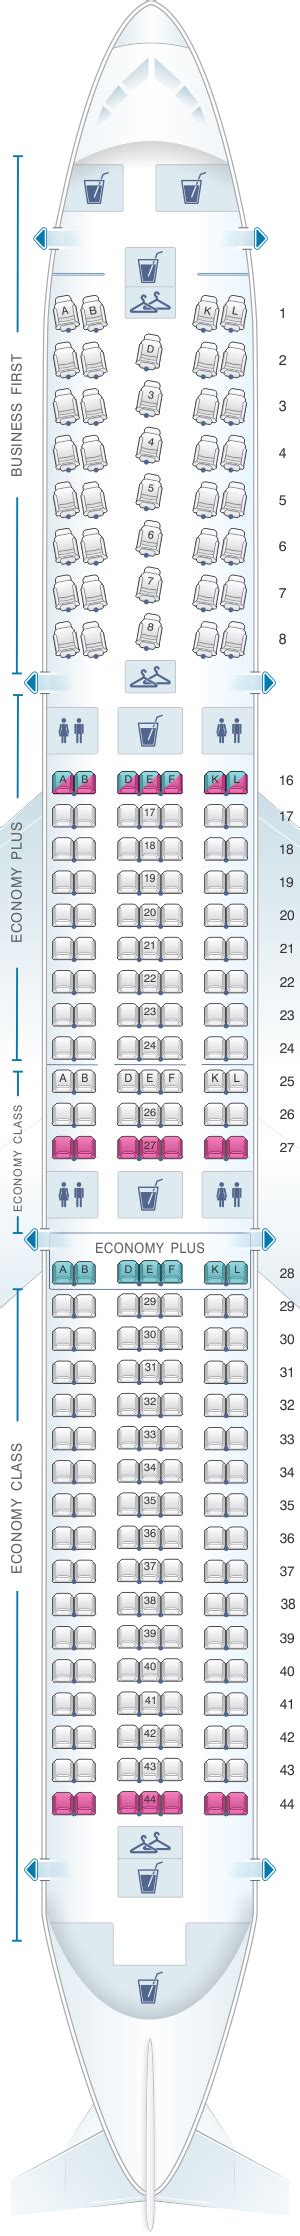 United Airlines Seat Map Two Birds Home